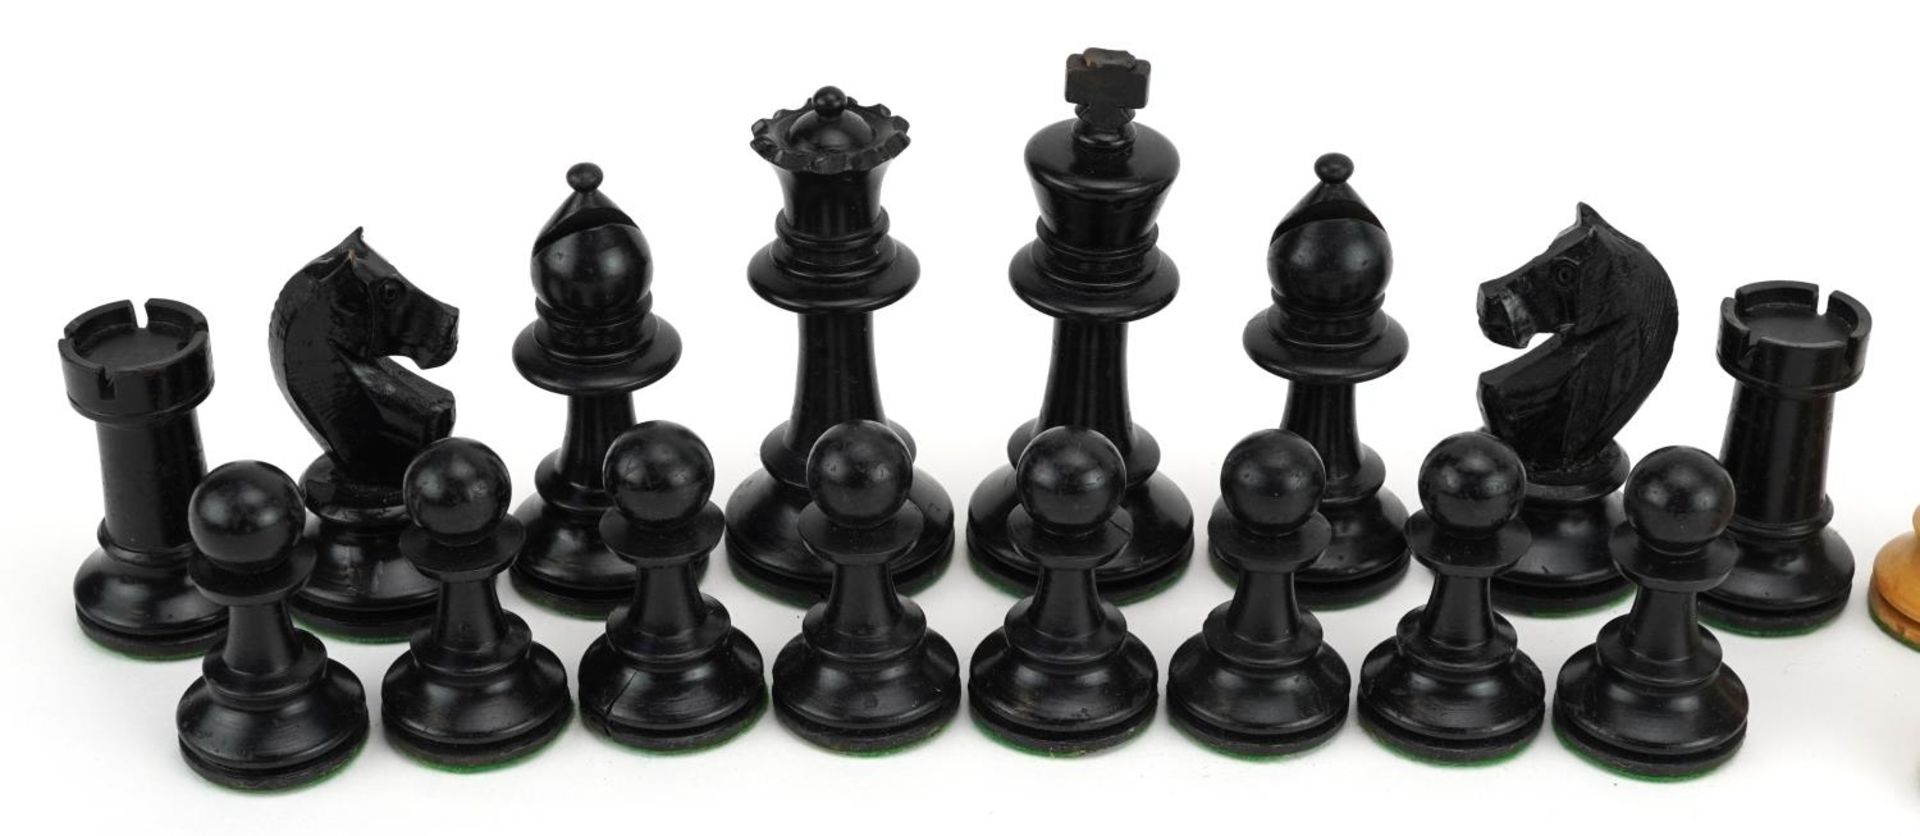 Manner of Jaques, boxwood and ebony Staunton pattern weighted chess set, the largest pieces each 8. - Image 2 of 6